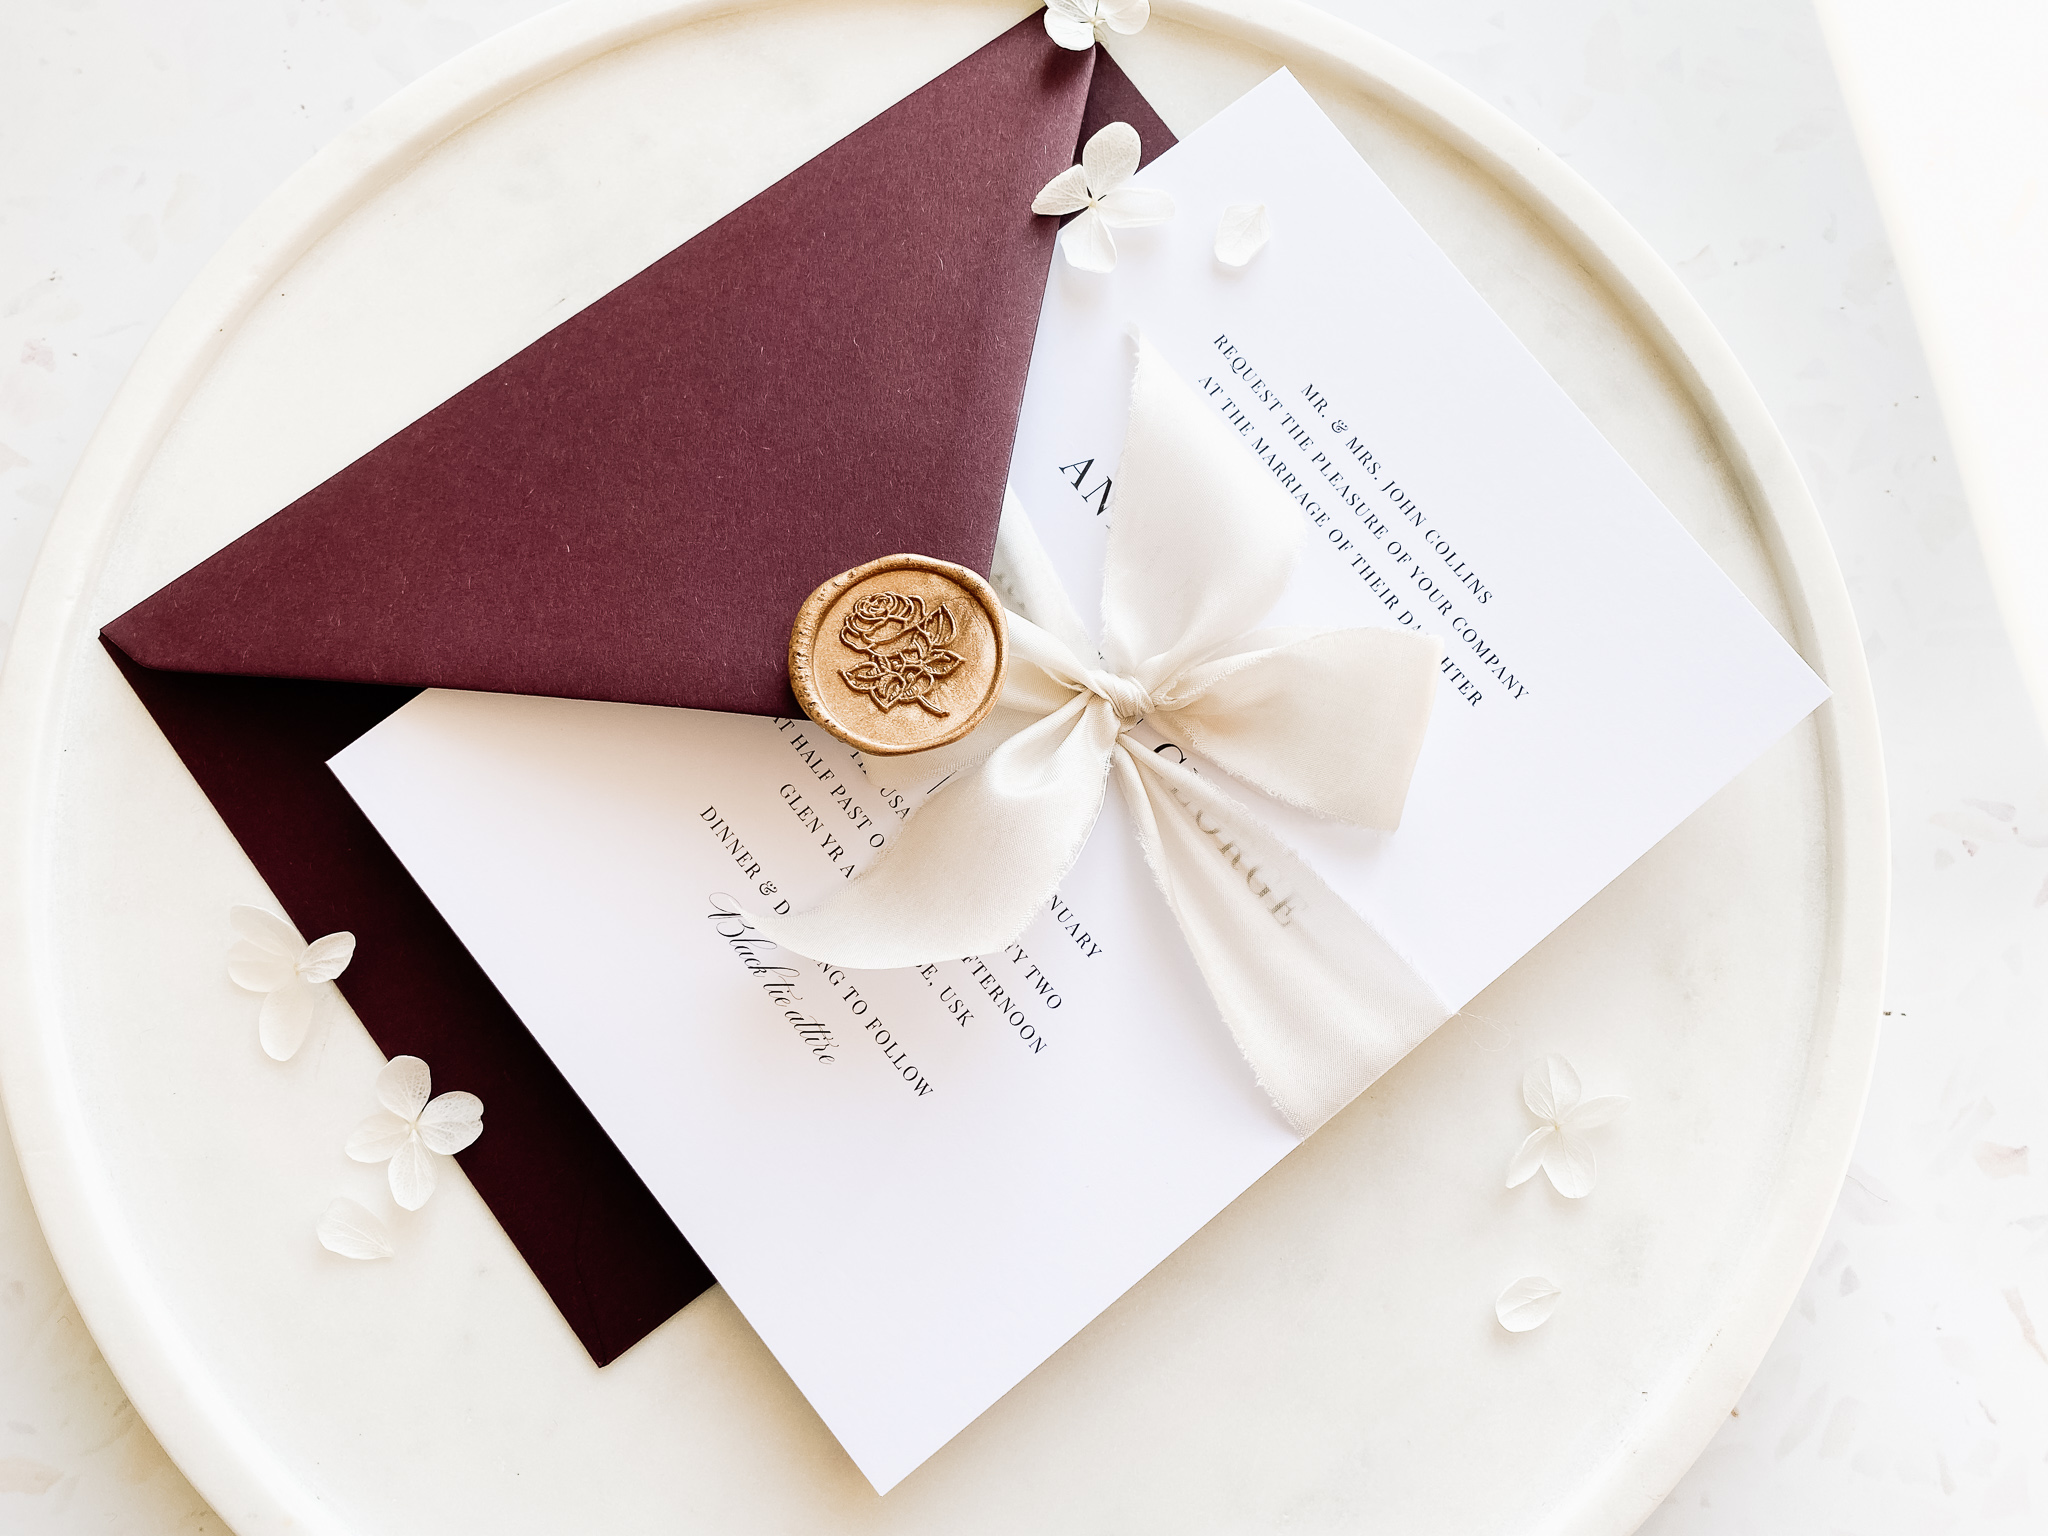 Burgundy envelope and gold wax seal.